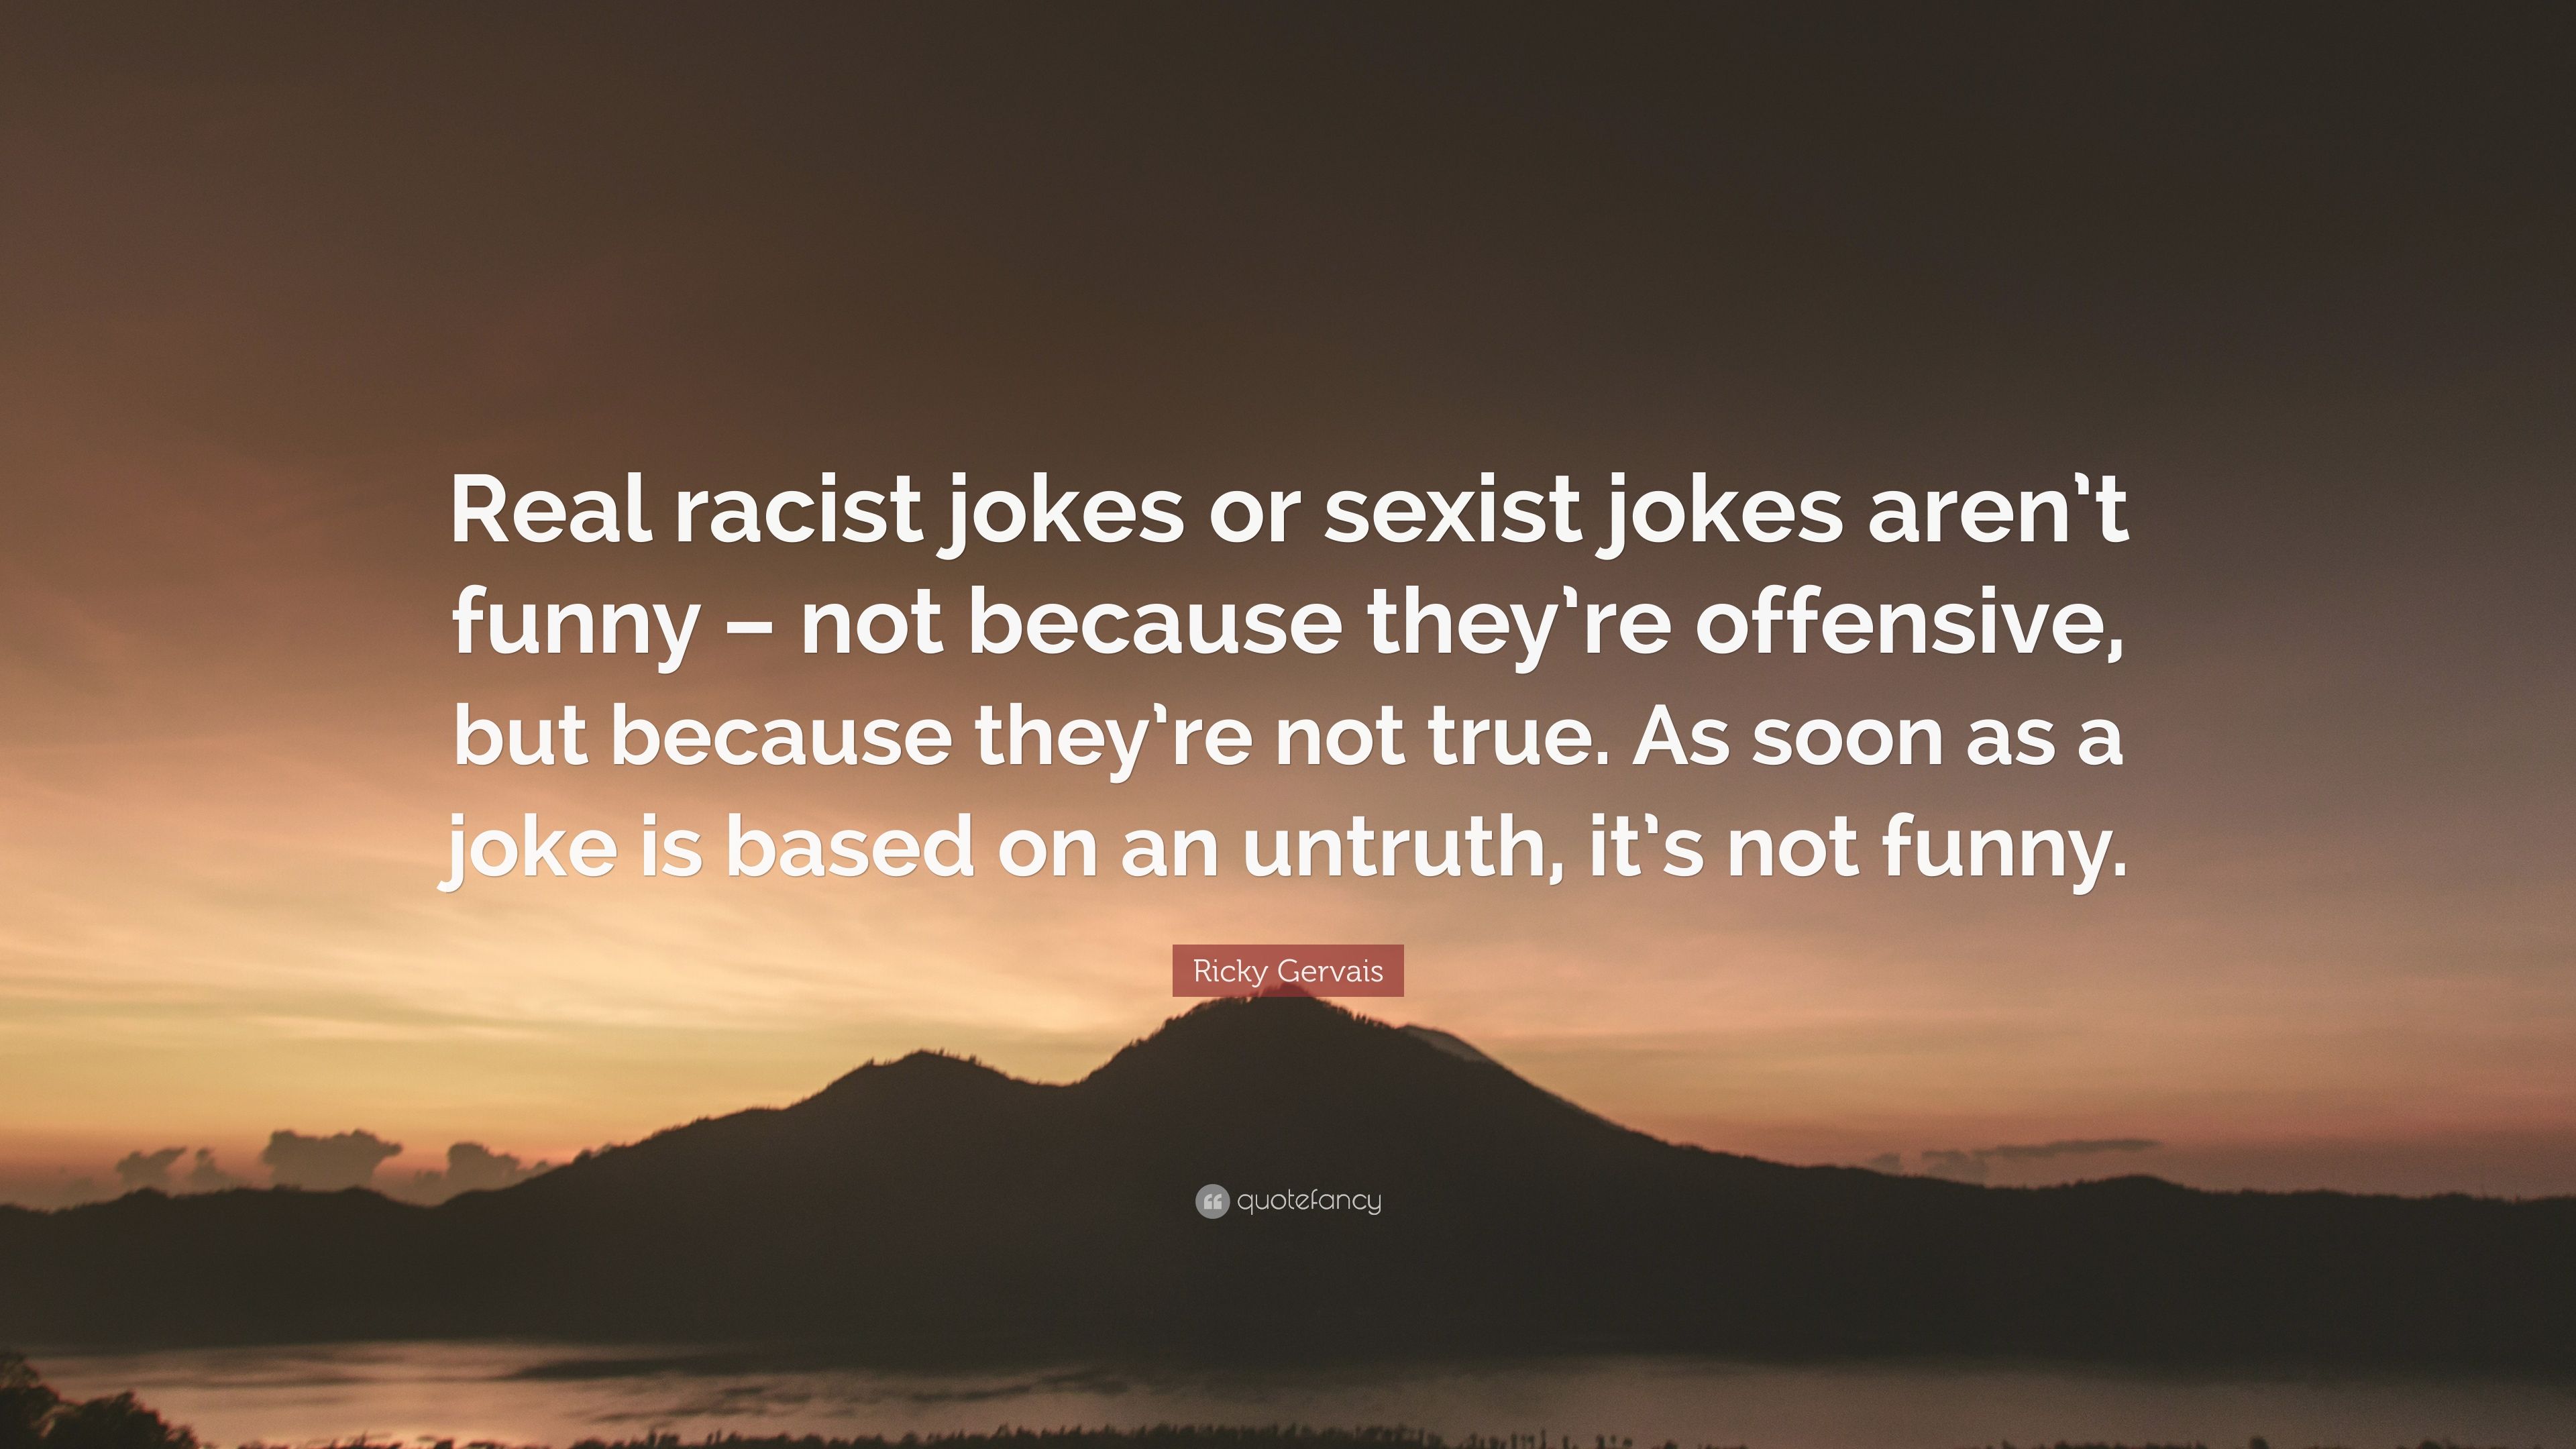 Ricky Gervais Quote: “Real racist jokes or sexist jokes aren't funny – not  because they're offensive, but because they're not true. As soon as...”